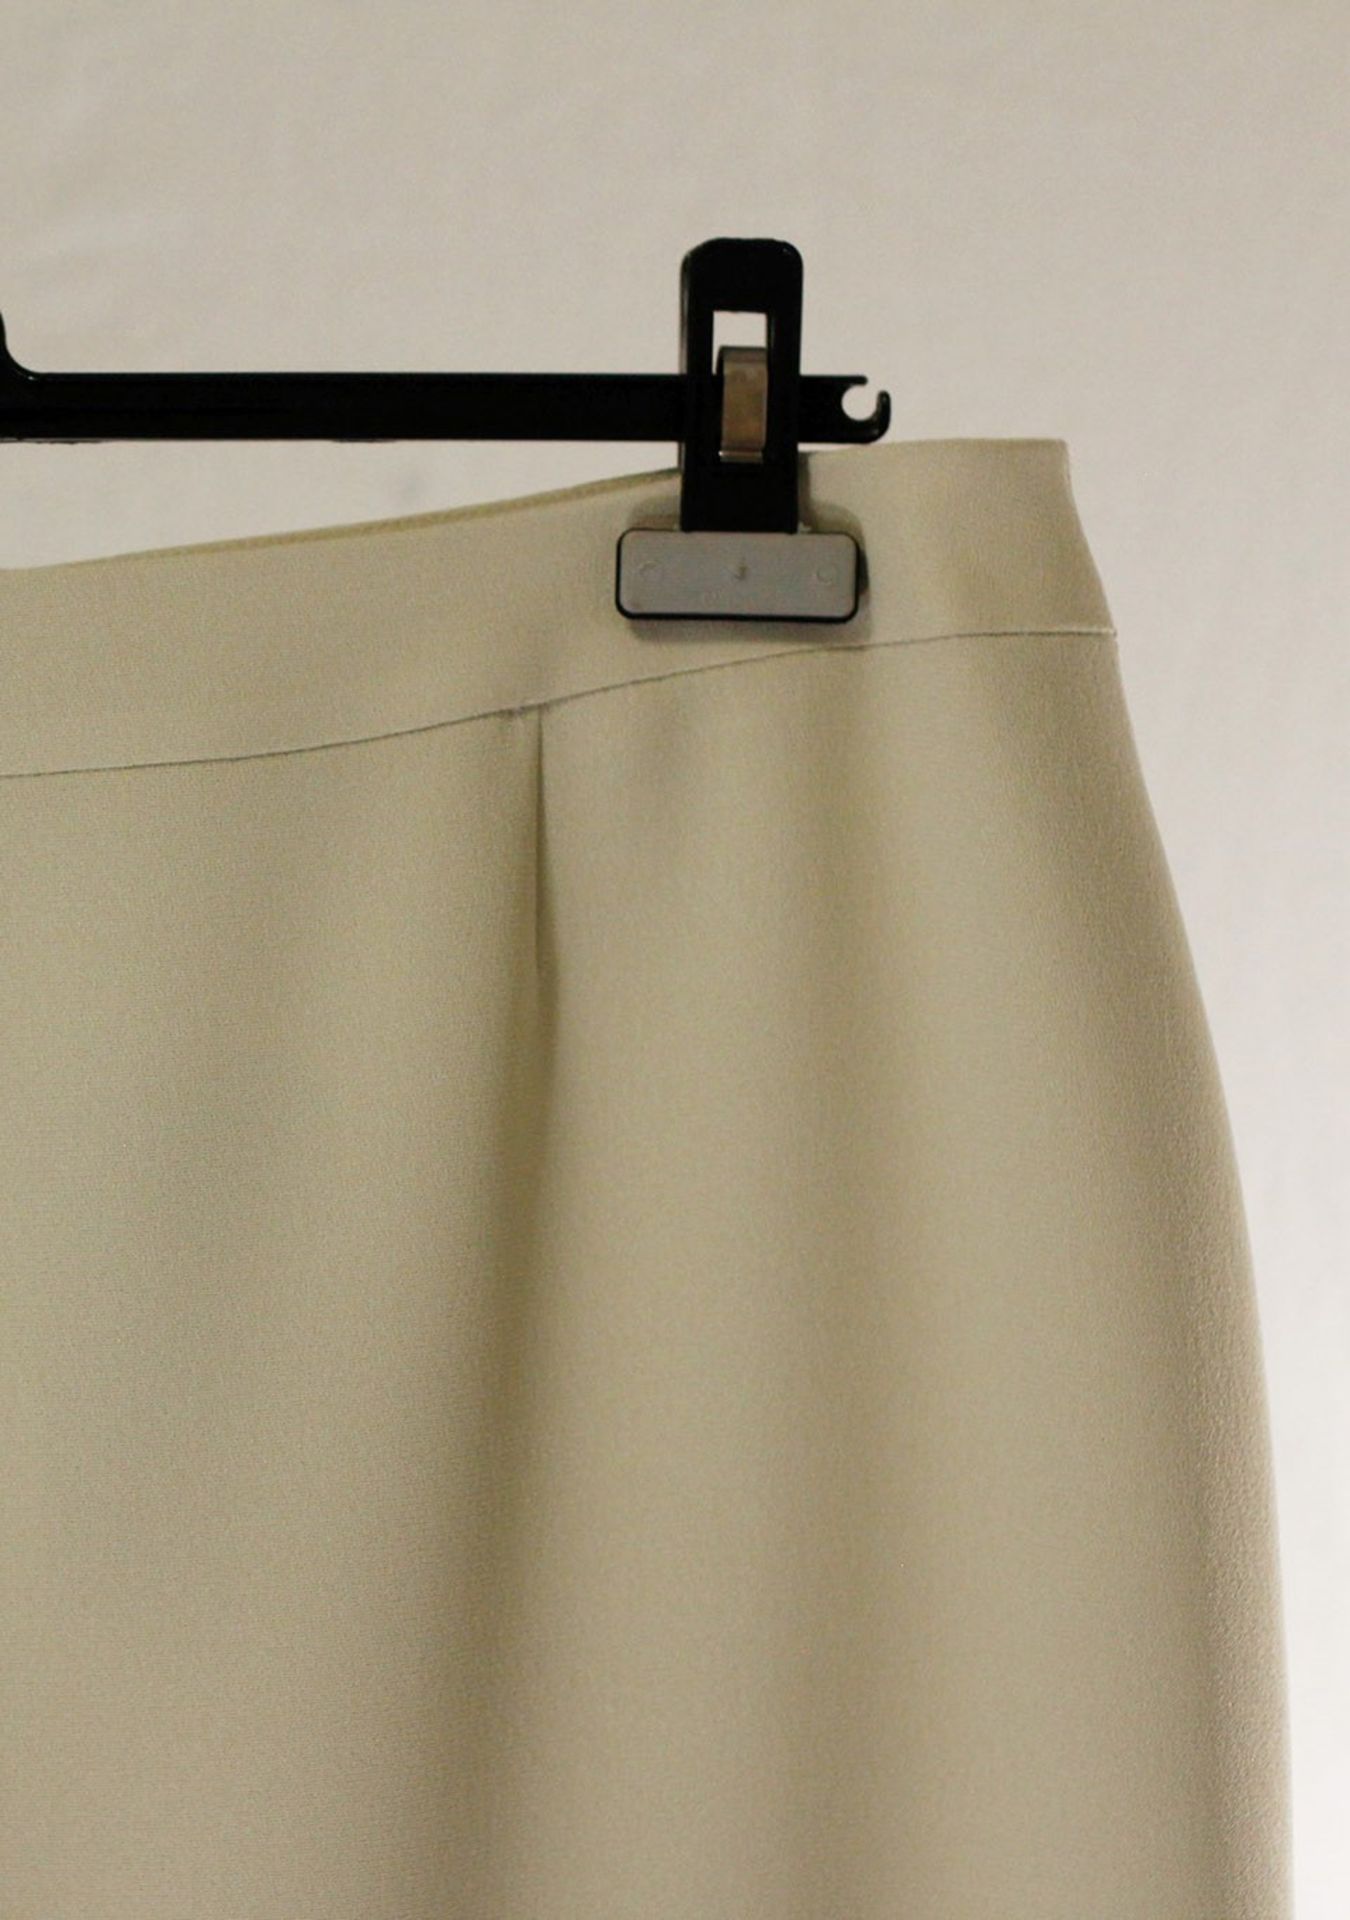 1 x Anne Belin Pistachio Skirt - Size: 16 - Material: 100% Polyester - From a High End Clothing - Image 5 of 11